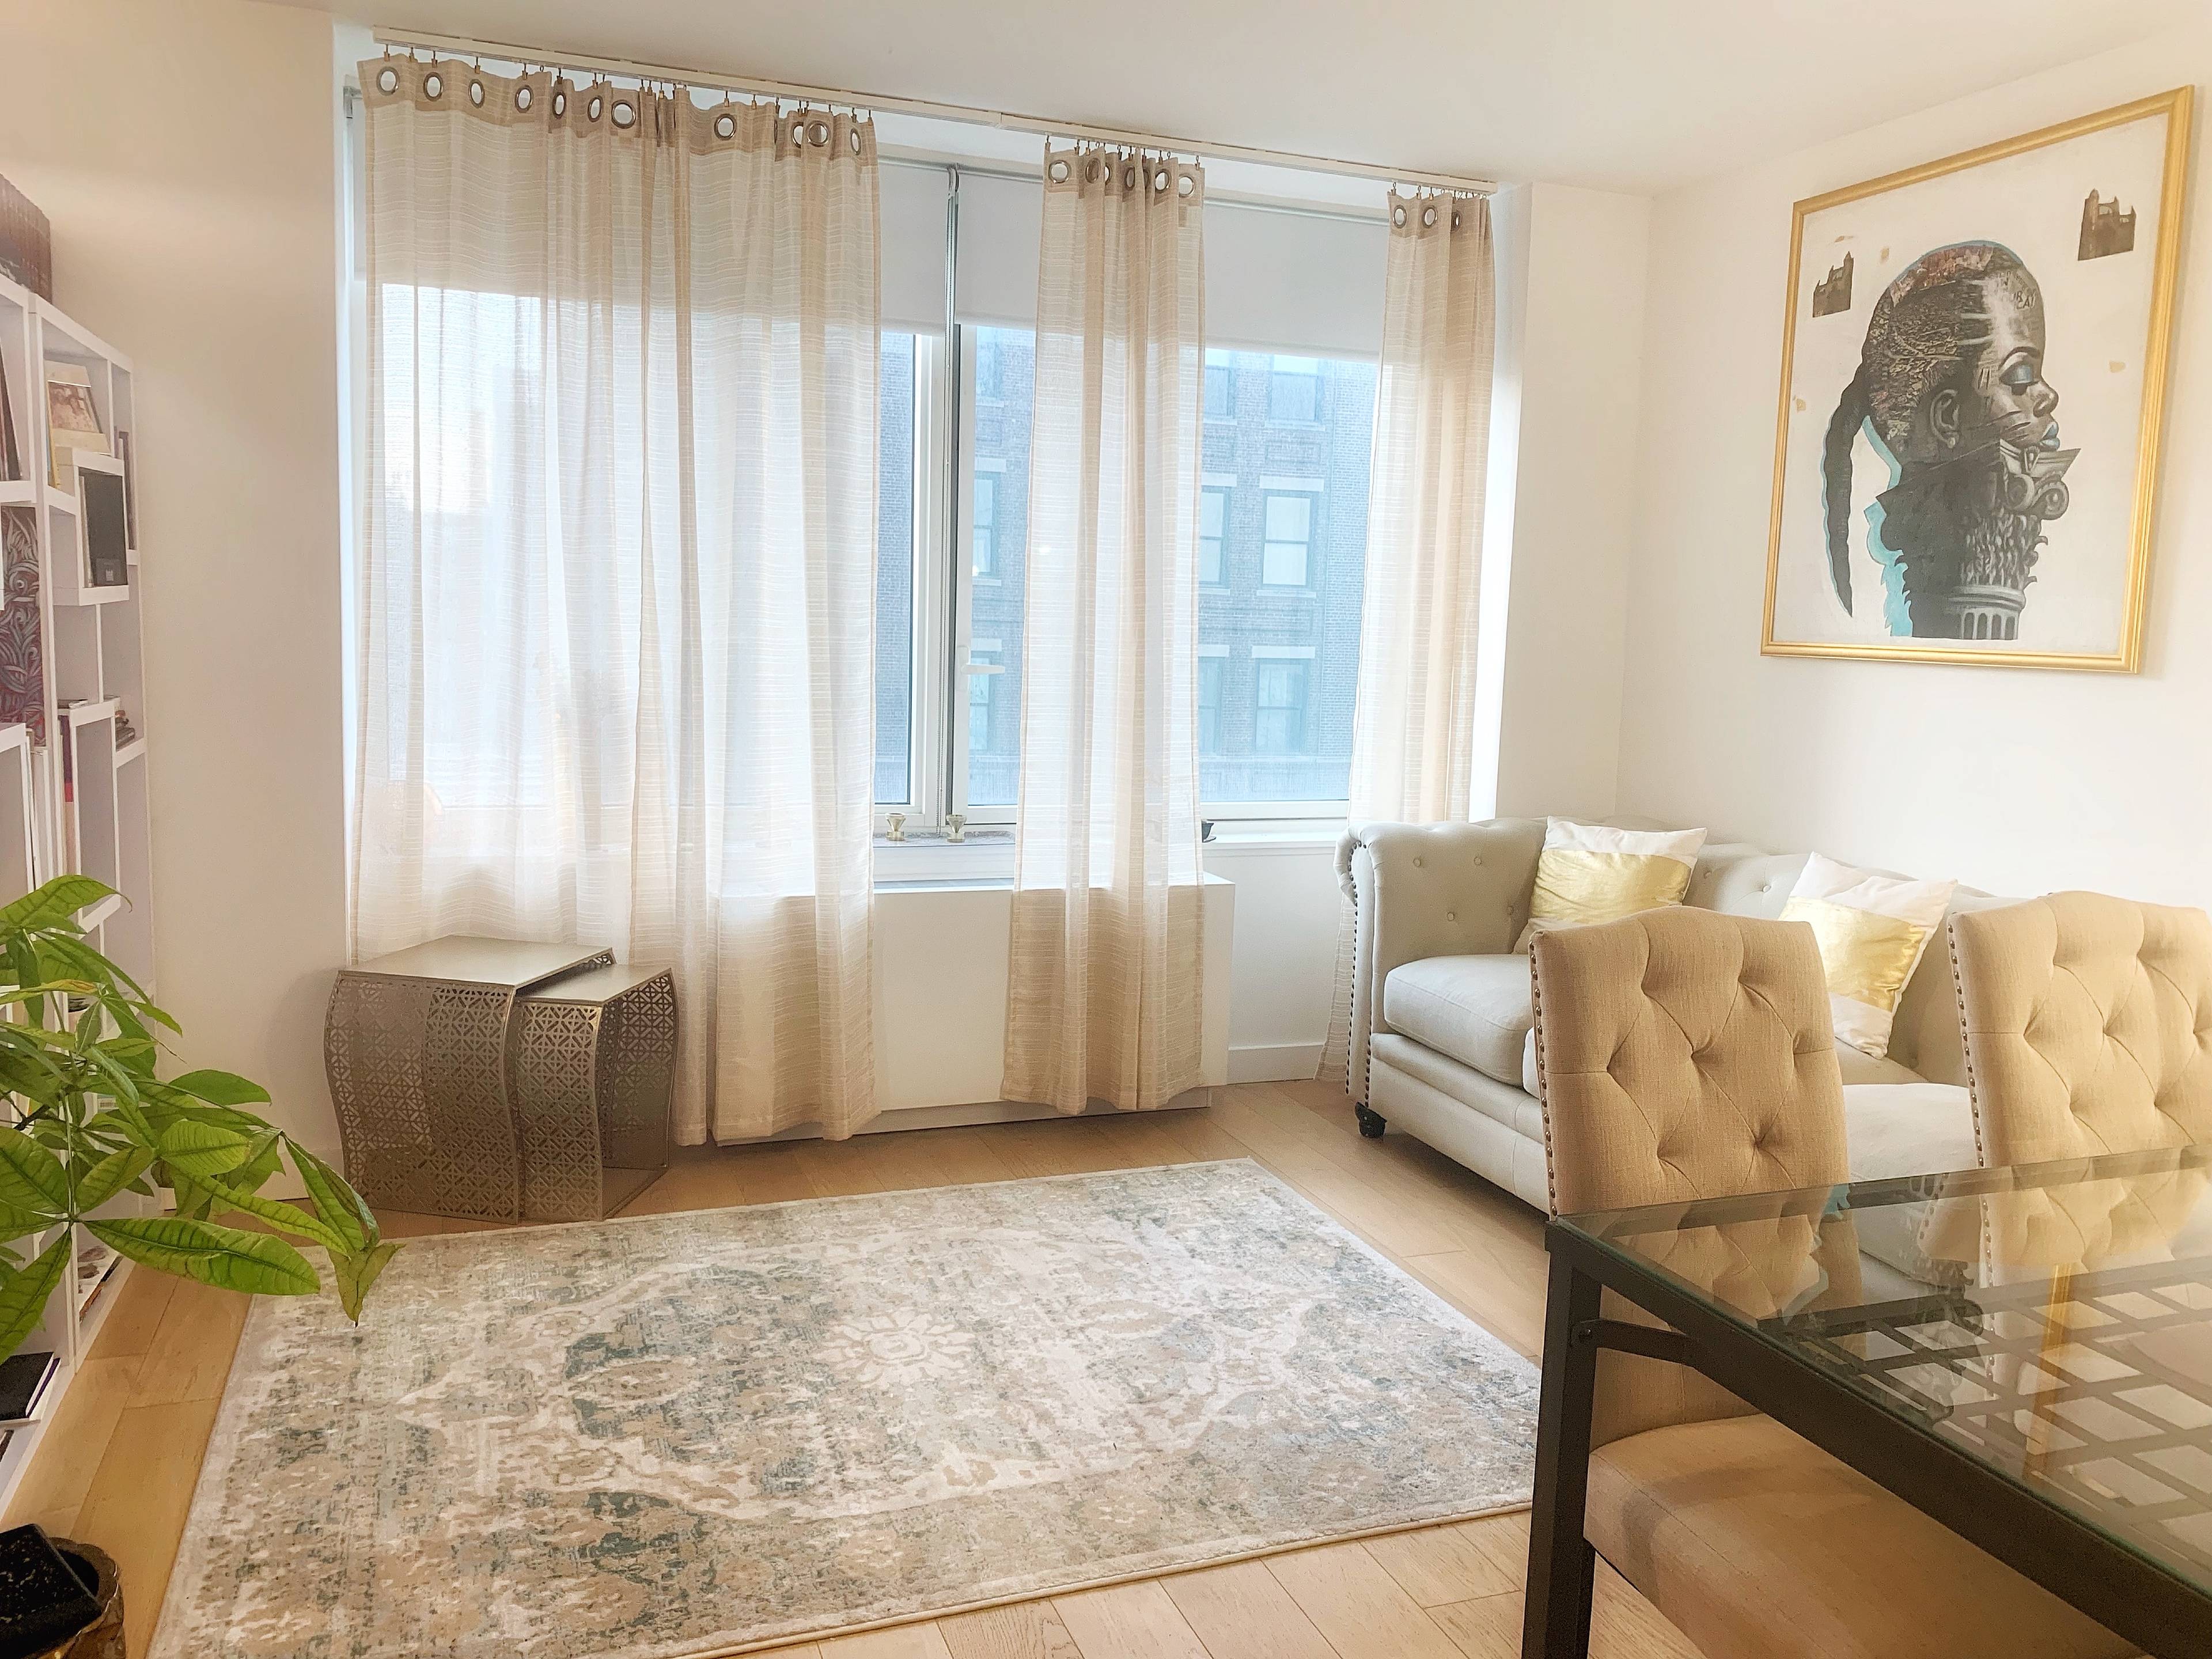 New York Luxury Living Like No Other! Stylish and Spacious Alcove Studio in Midtown West with Amazing Amenities